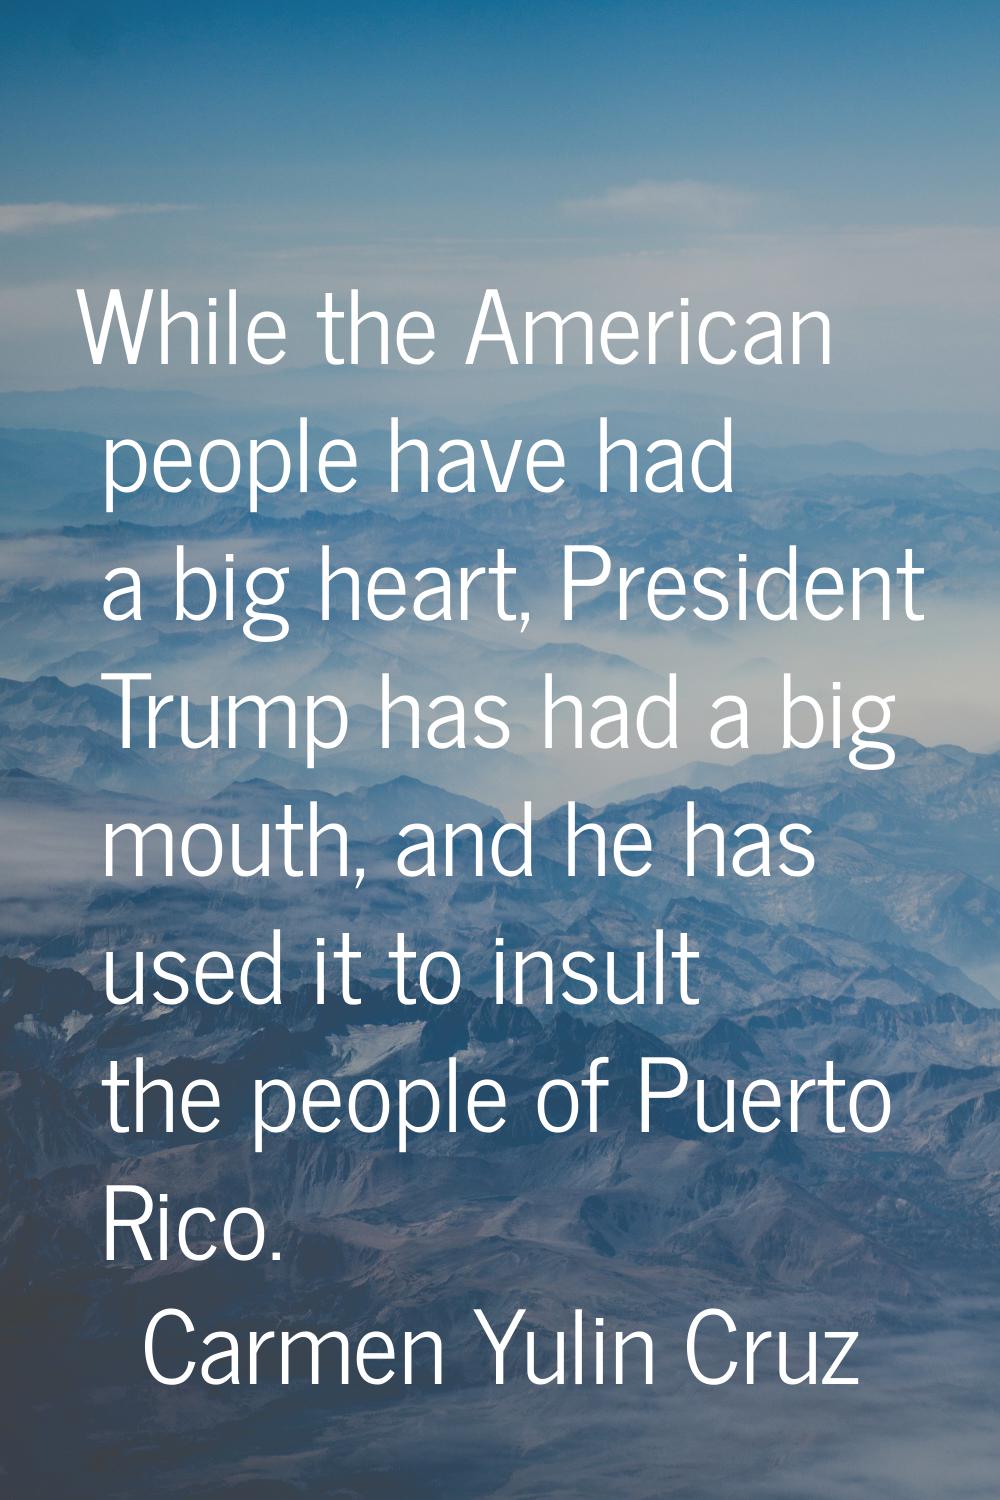 While the American people have had a big heart, President Trump has had a big mouth, and he has use